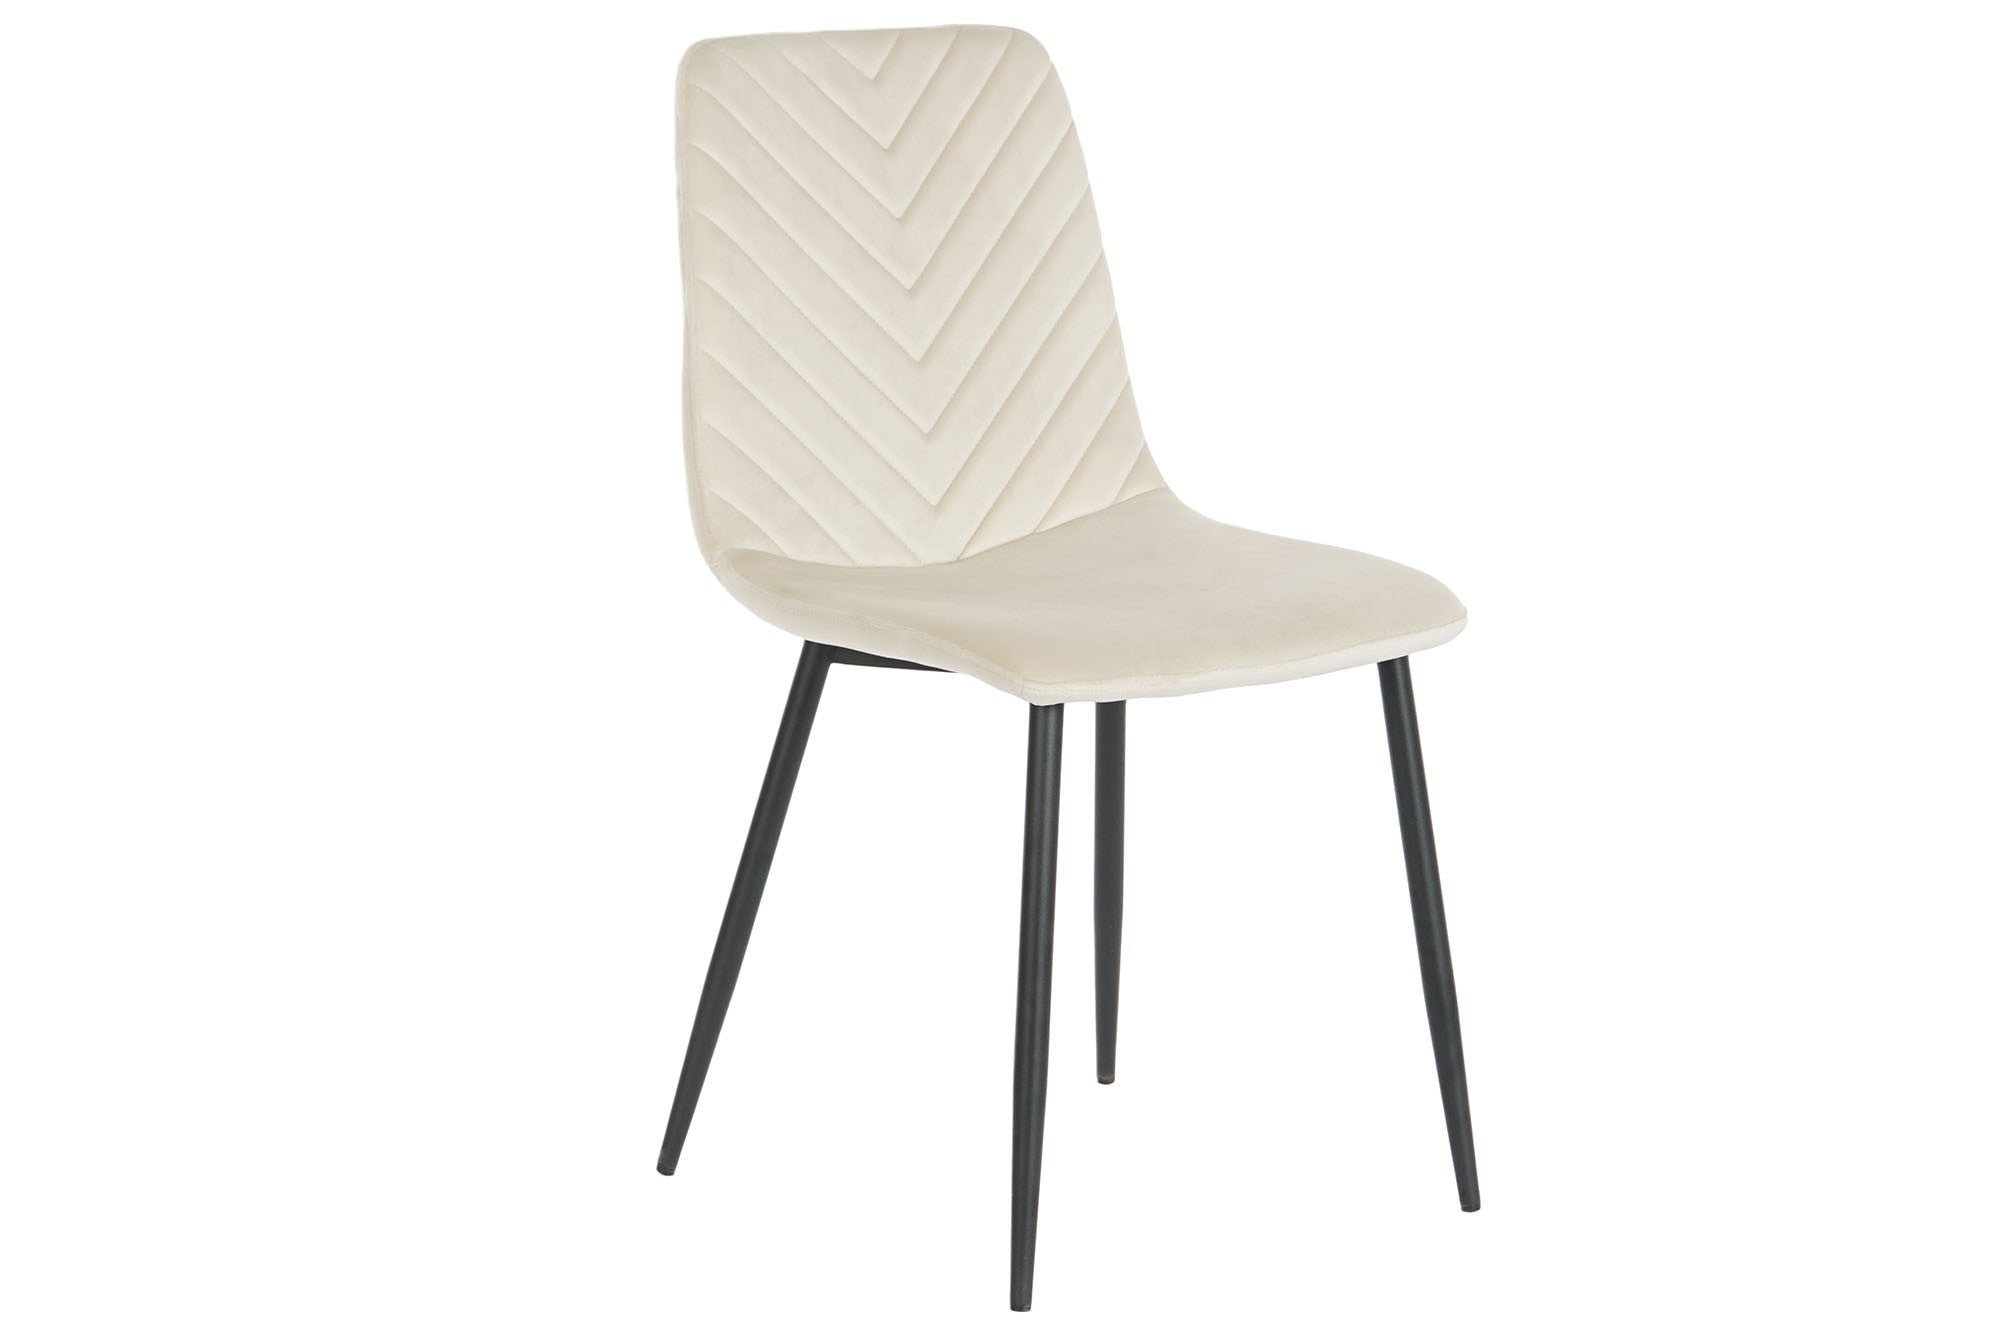 Modern Design Chair in Beige Fabric and Black Metal Home Decor